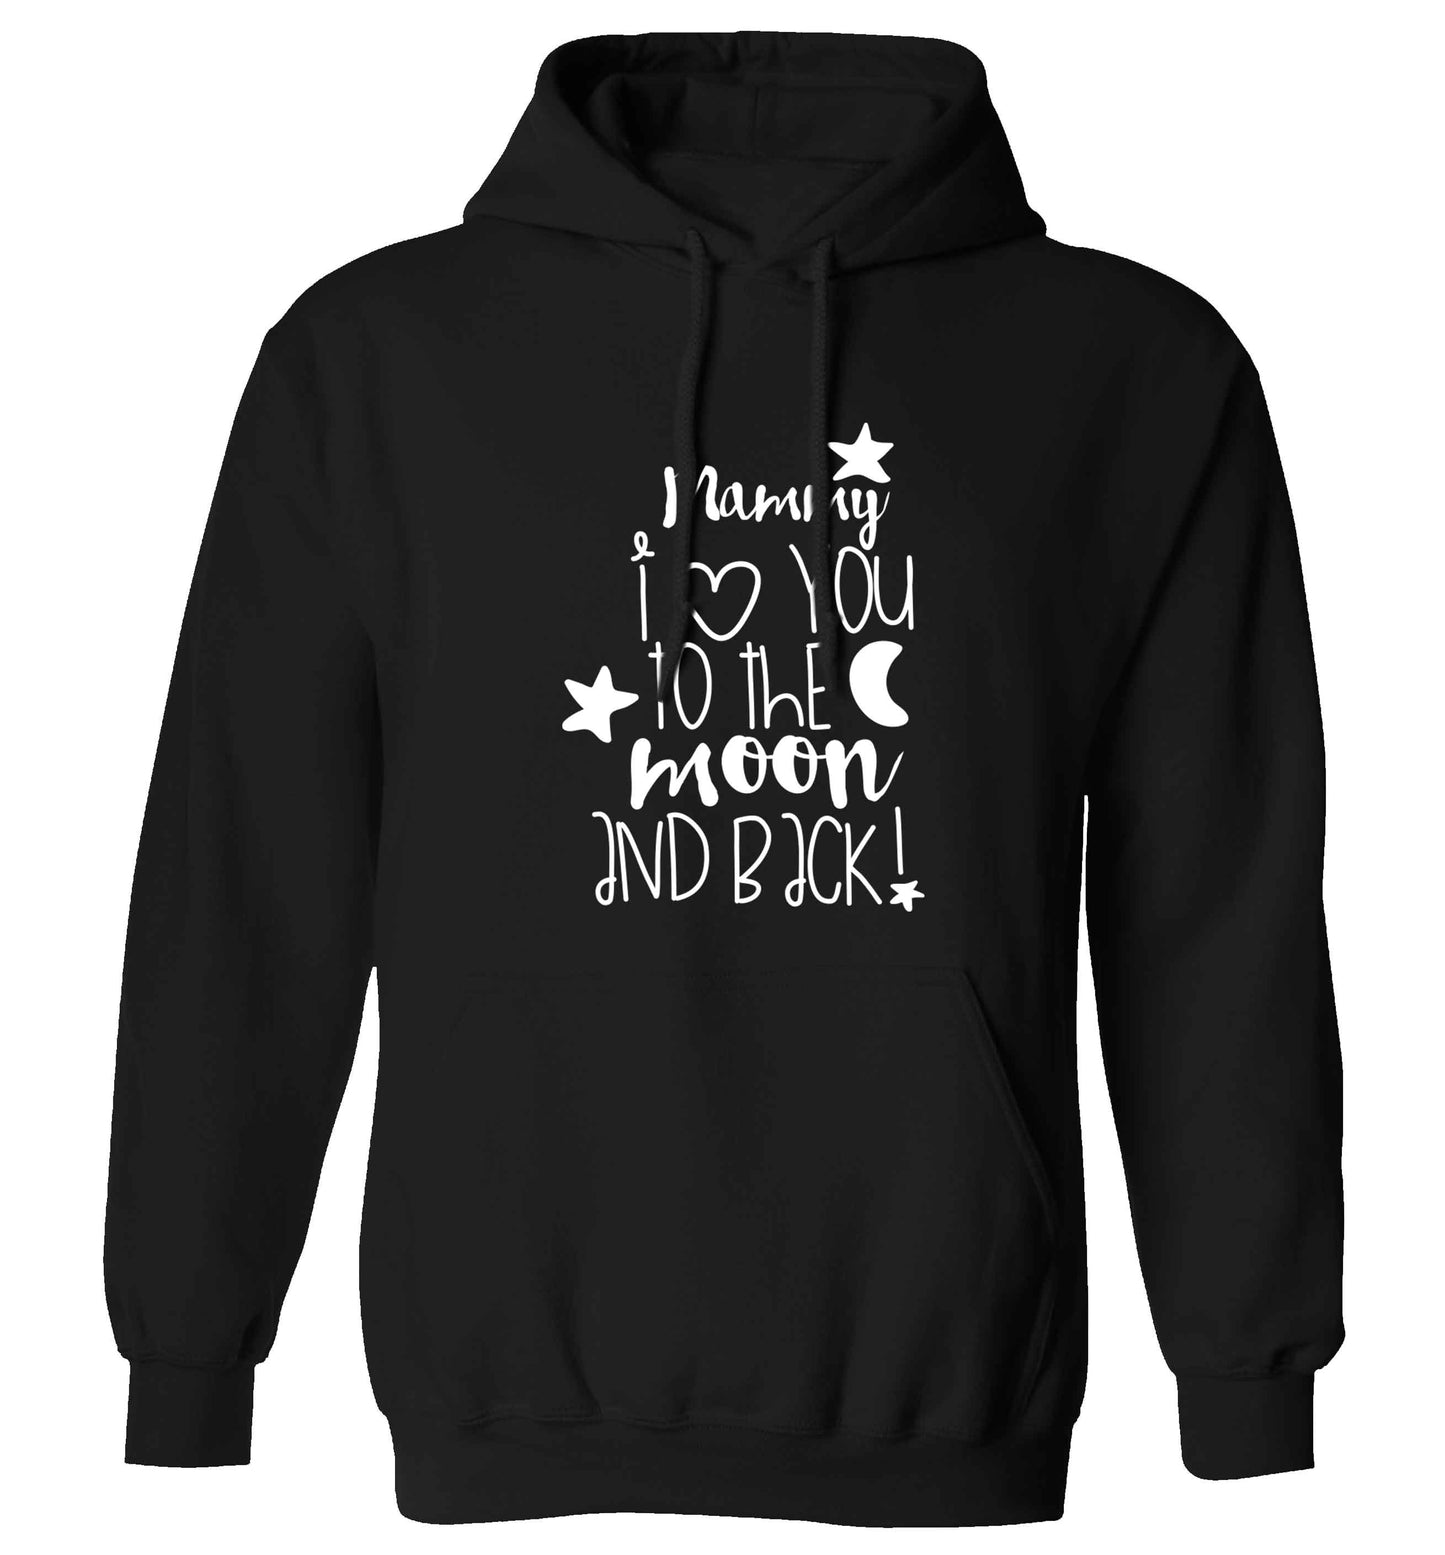 Mammy I love you to the moon and back adults unisex black hoodie 2XL